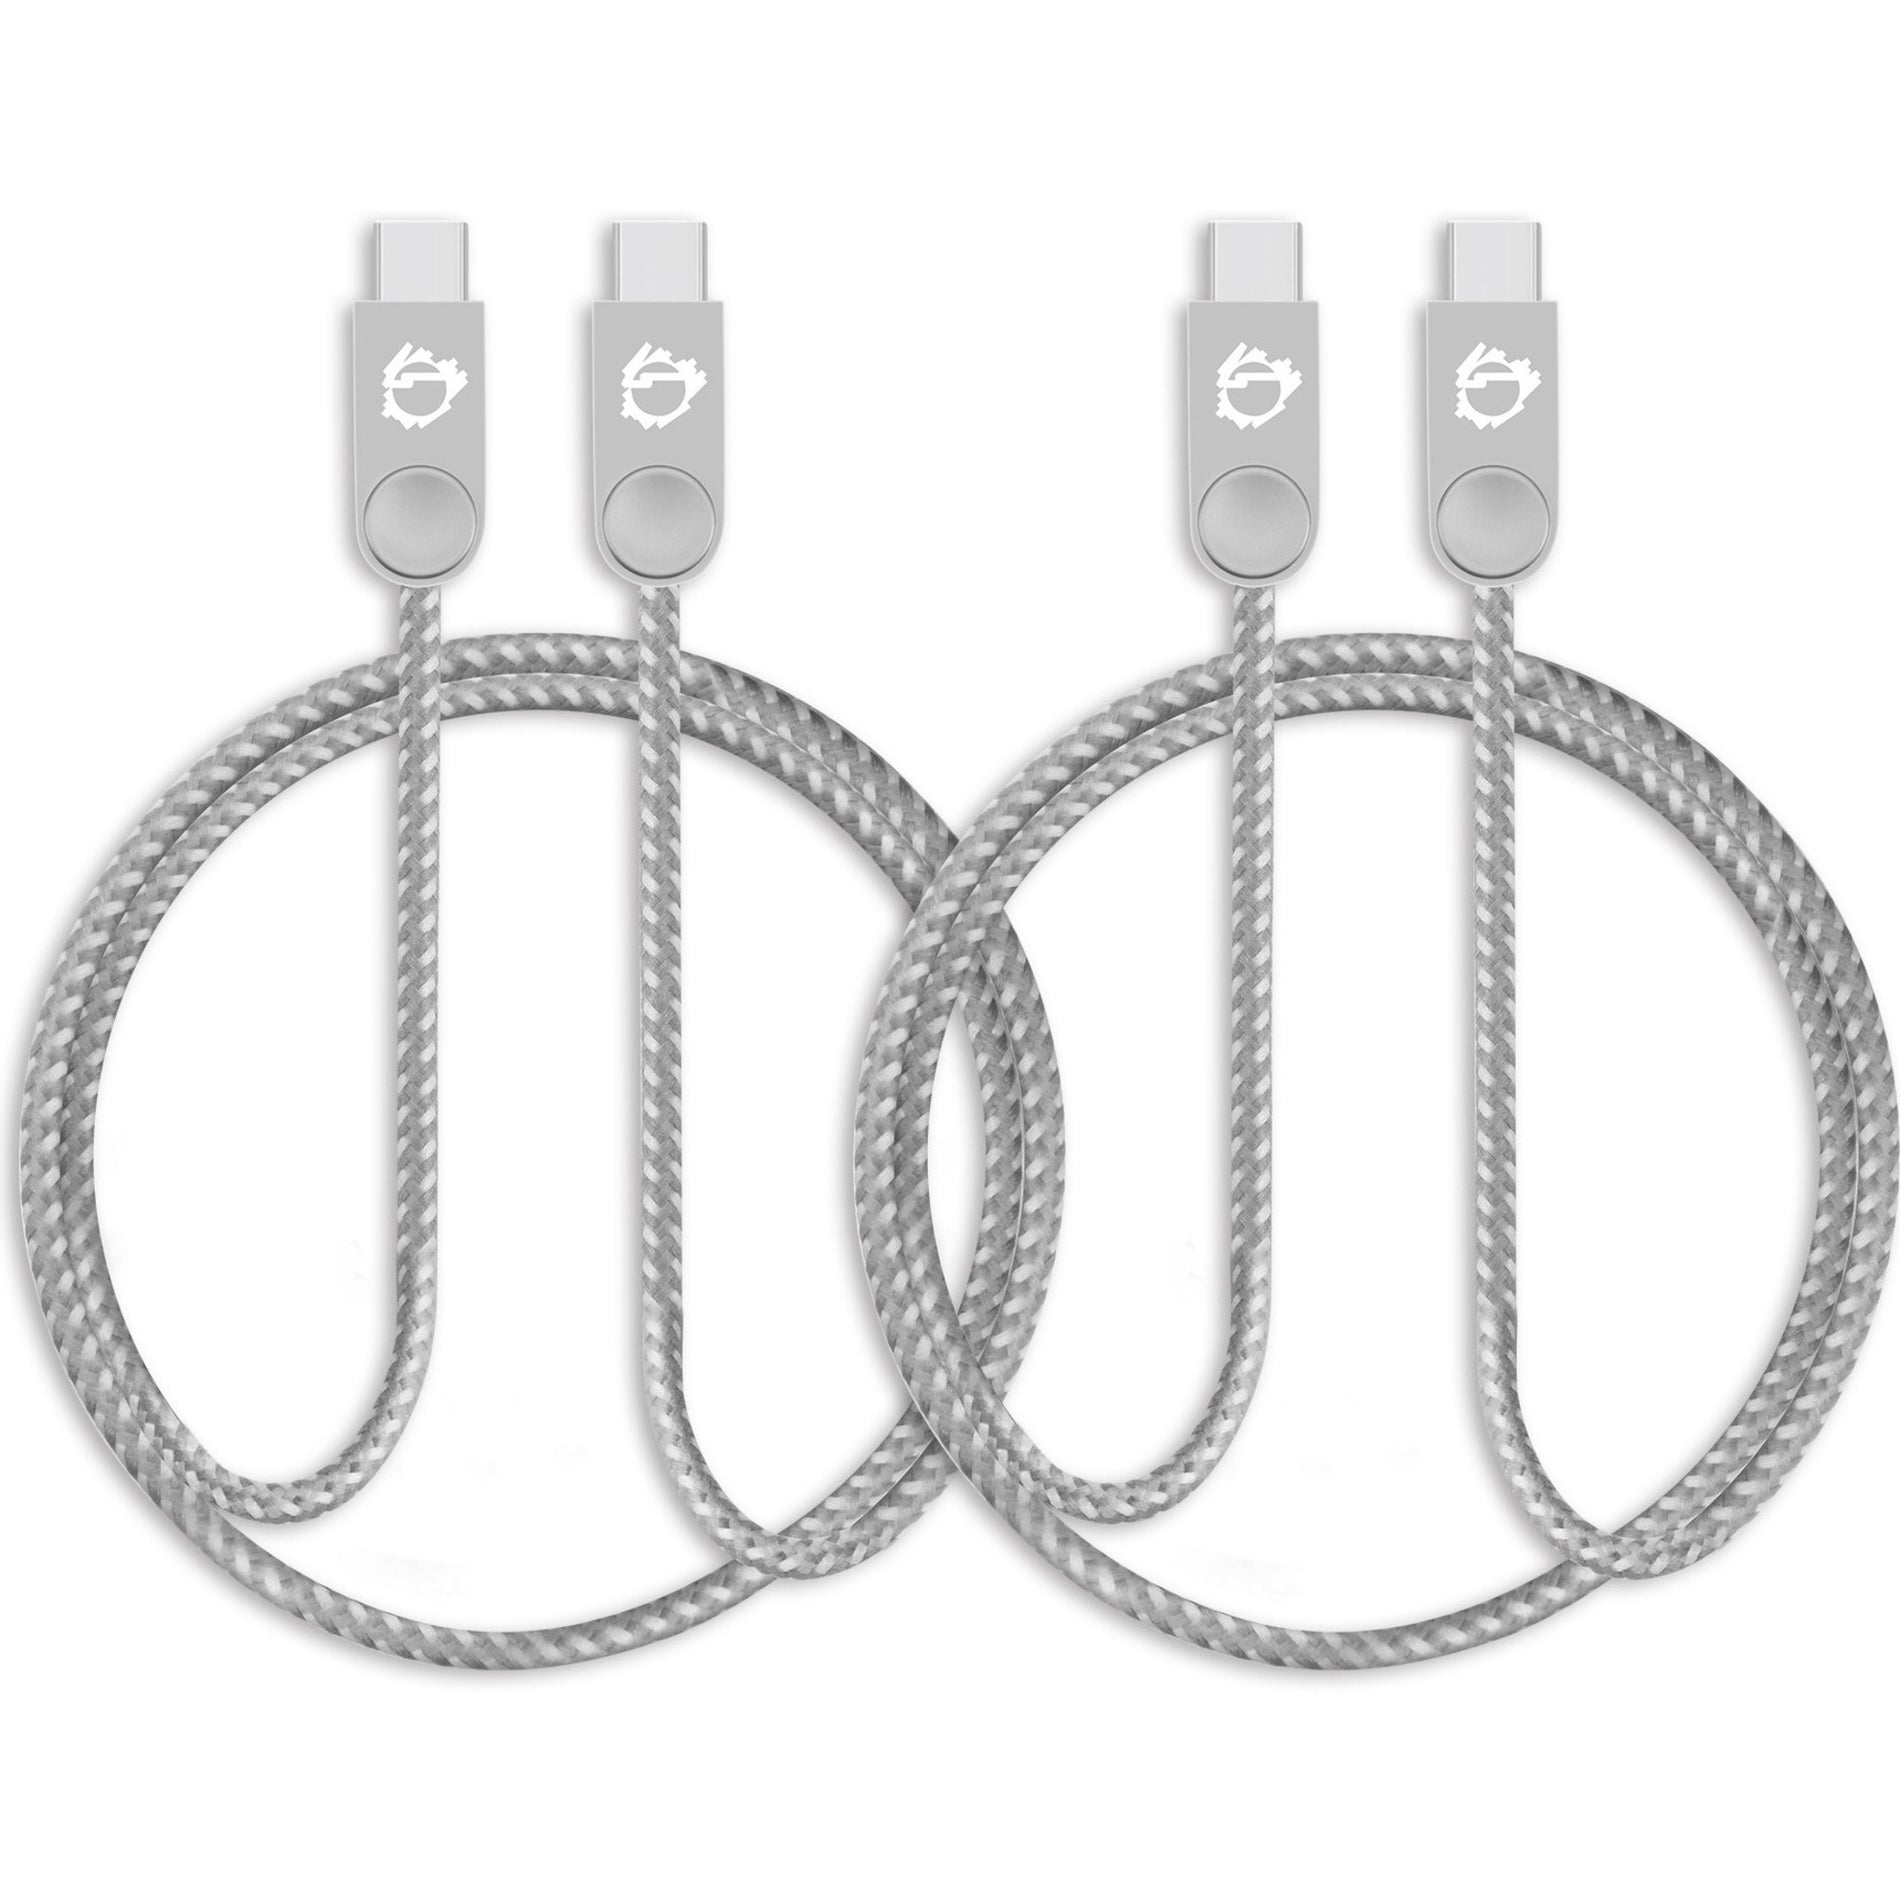 SIIG CB-US0P11-S1 Zinc Alloy USB-C to USB-C Charging & Sync Braided Cable - 1.65ft, 2-Pack, Durable and Reversible